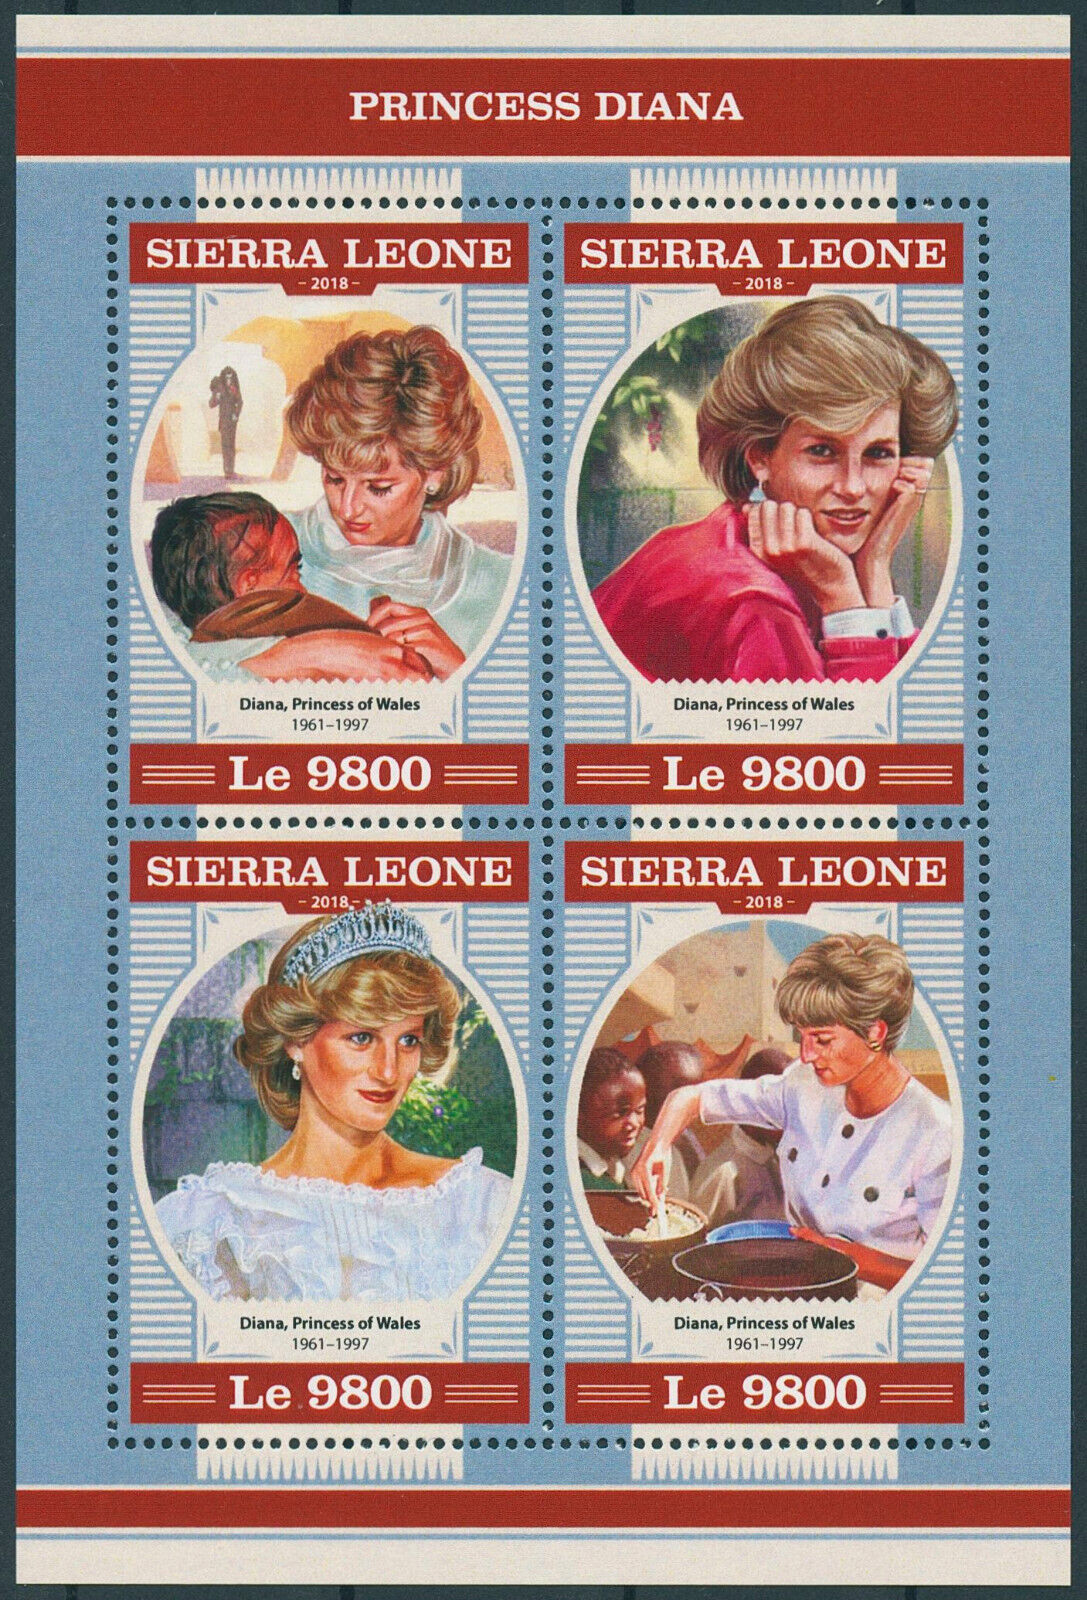 Sierra Leone 2018 MNH Royalty Stamps Princess Diana of Wales 4v M/S